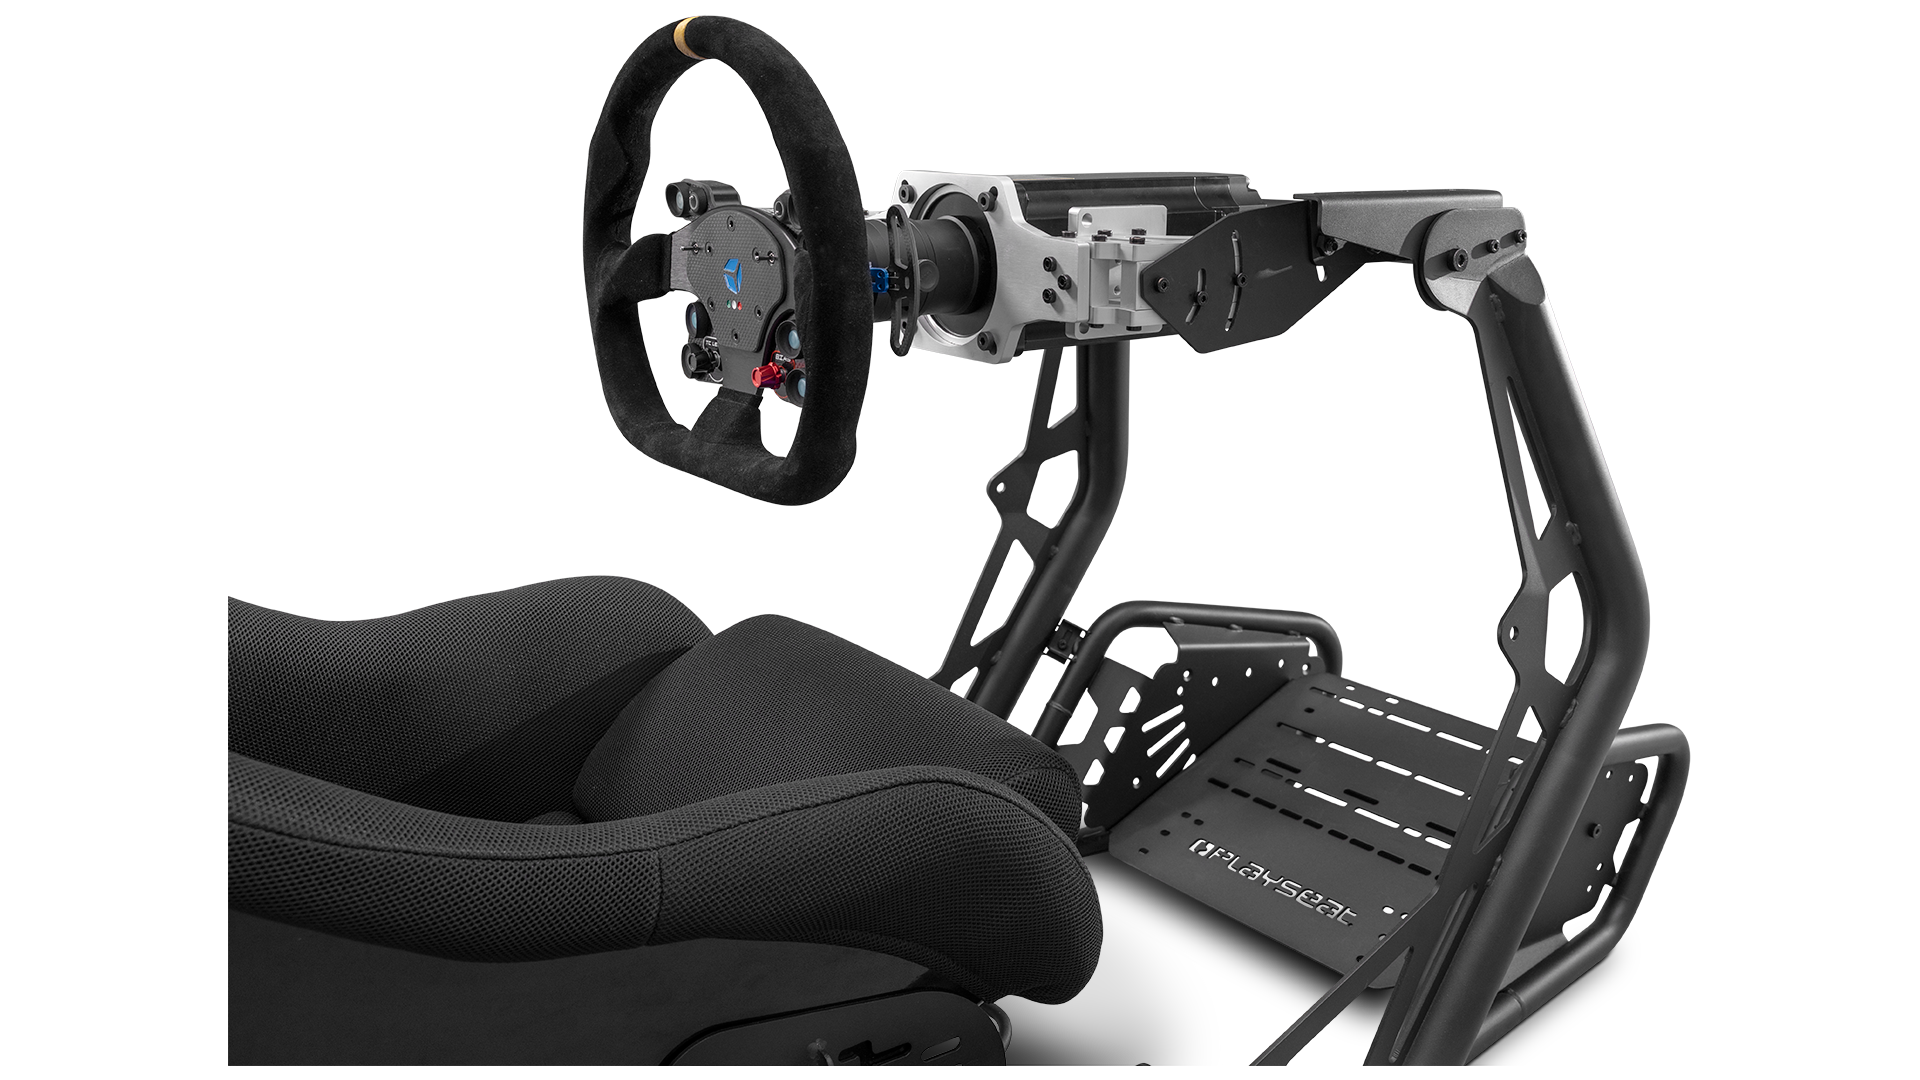 playseat-direct-drive-pro-adapter-with-playseat-sensation-pro-black-actifit-simucube-rally-steering-wheel-1920x1080-1.png